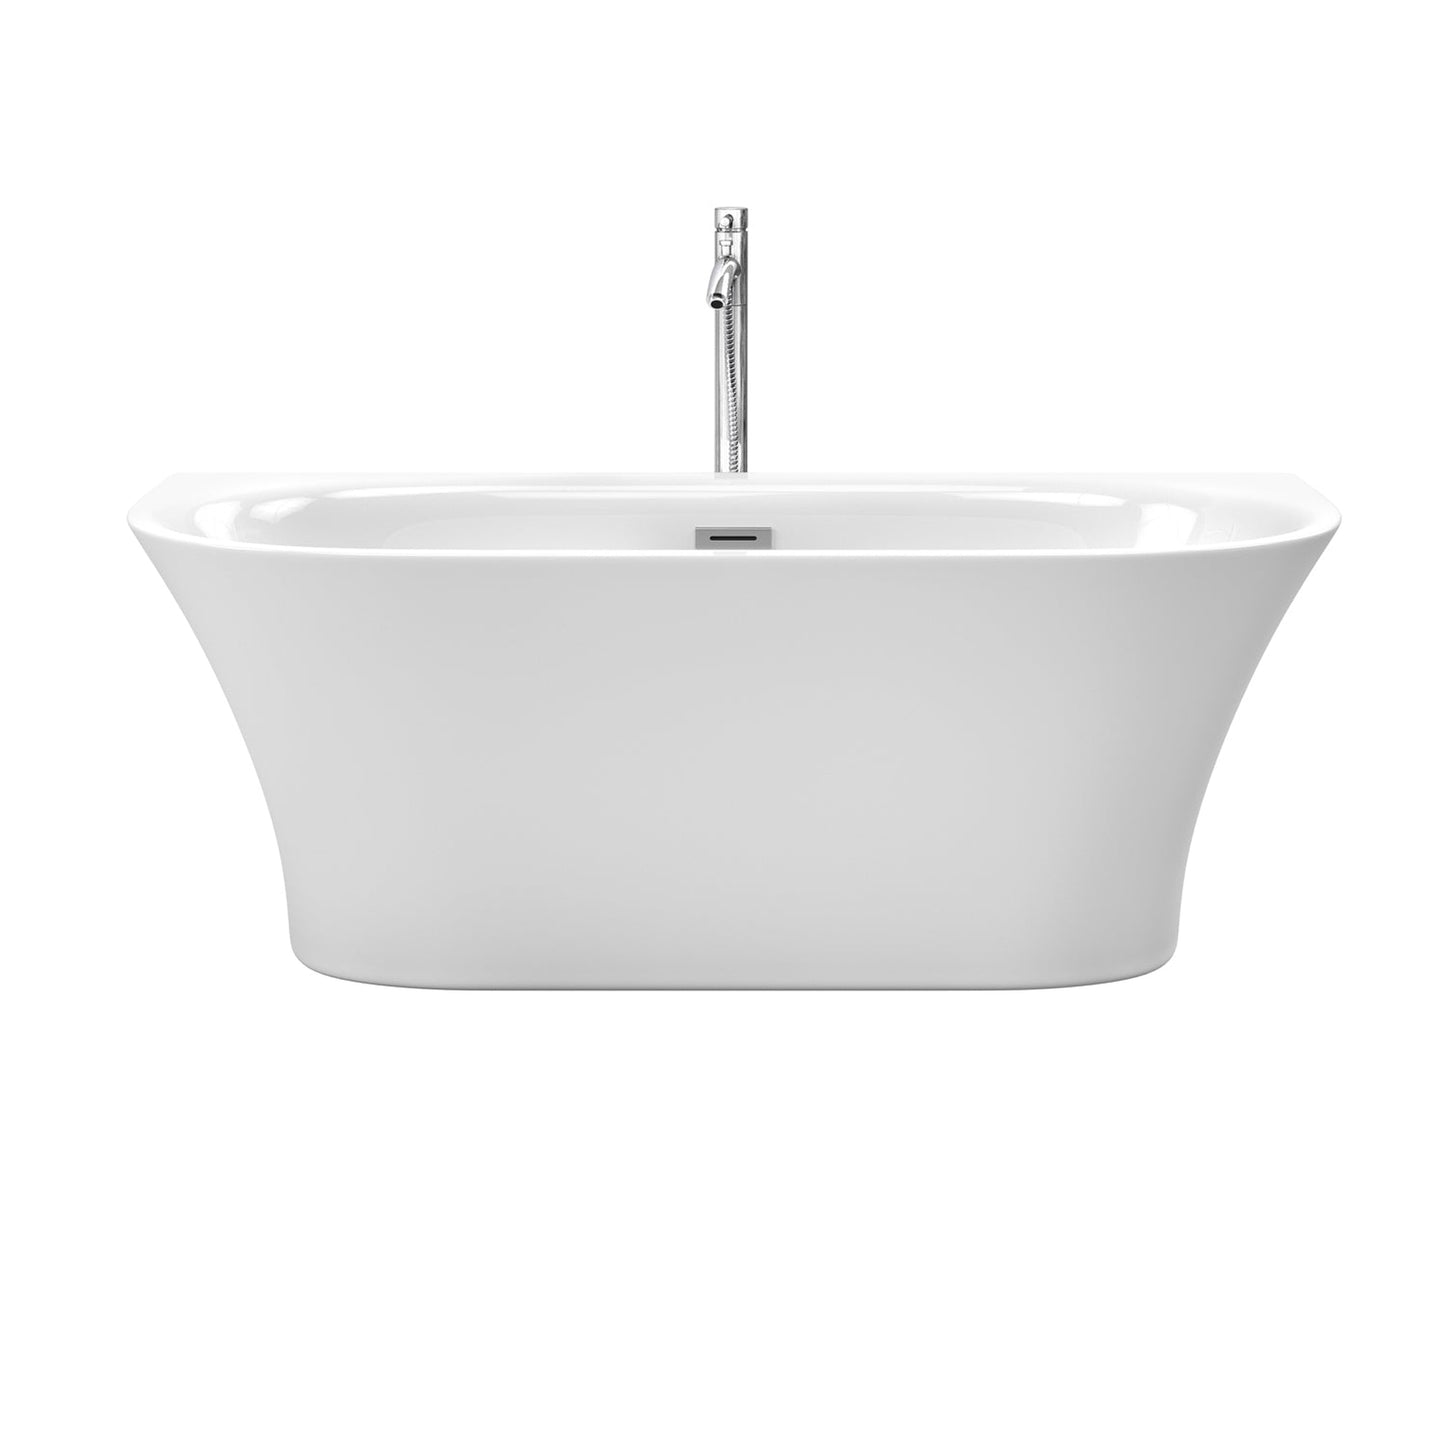 Wyndham Collection Cybill 67" Freestanding Bathtub in White With Floor Mounted Faucet, Drain and Overflow Trim in Polished Chrome